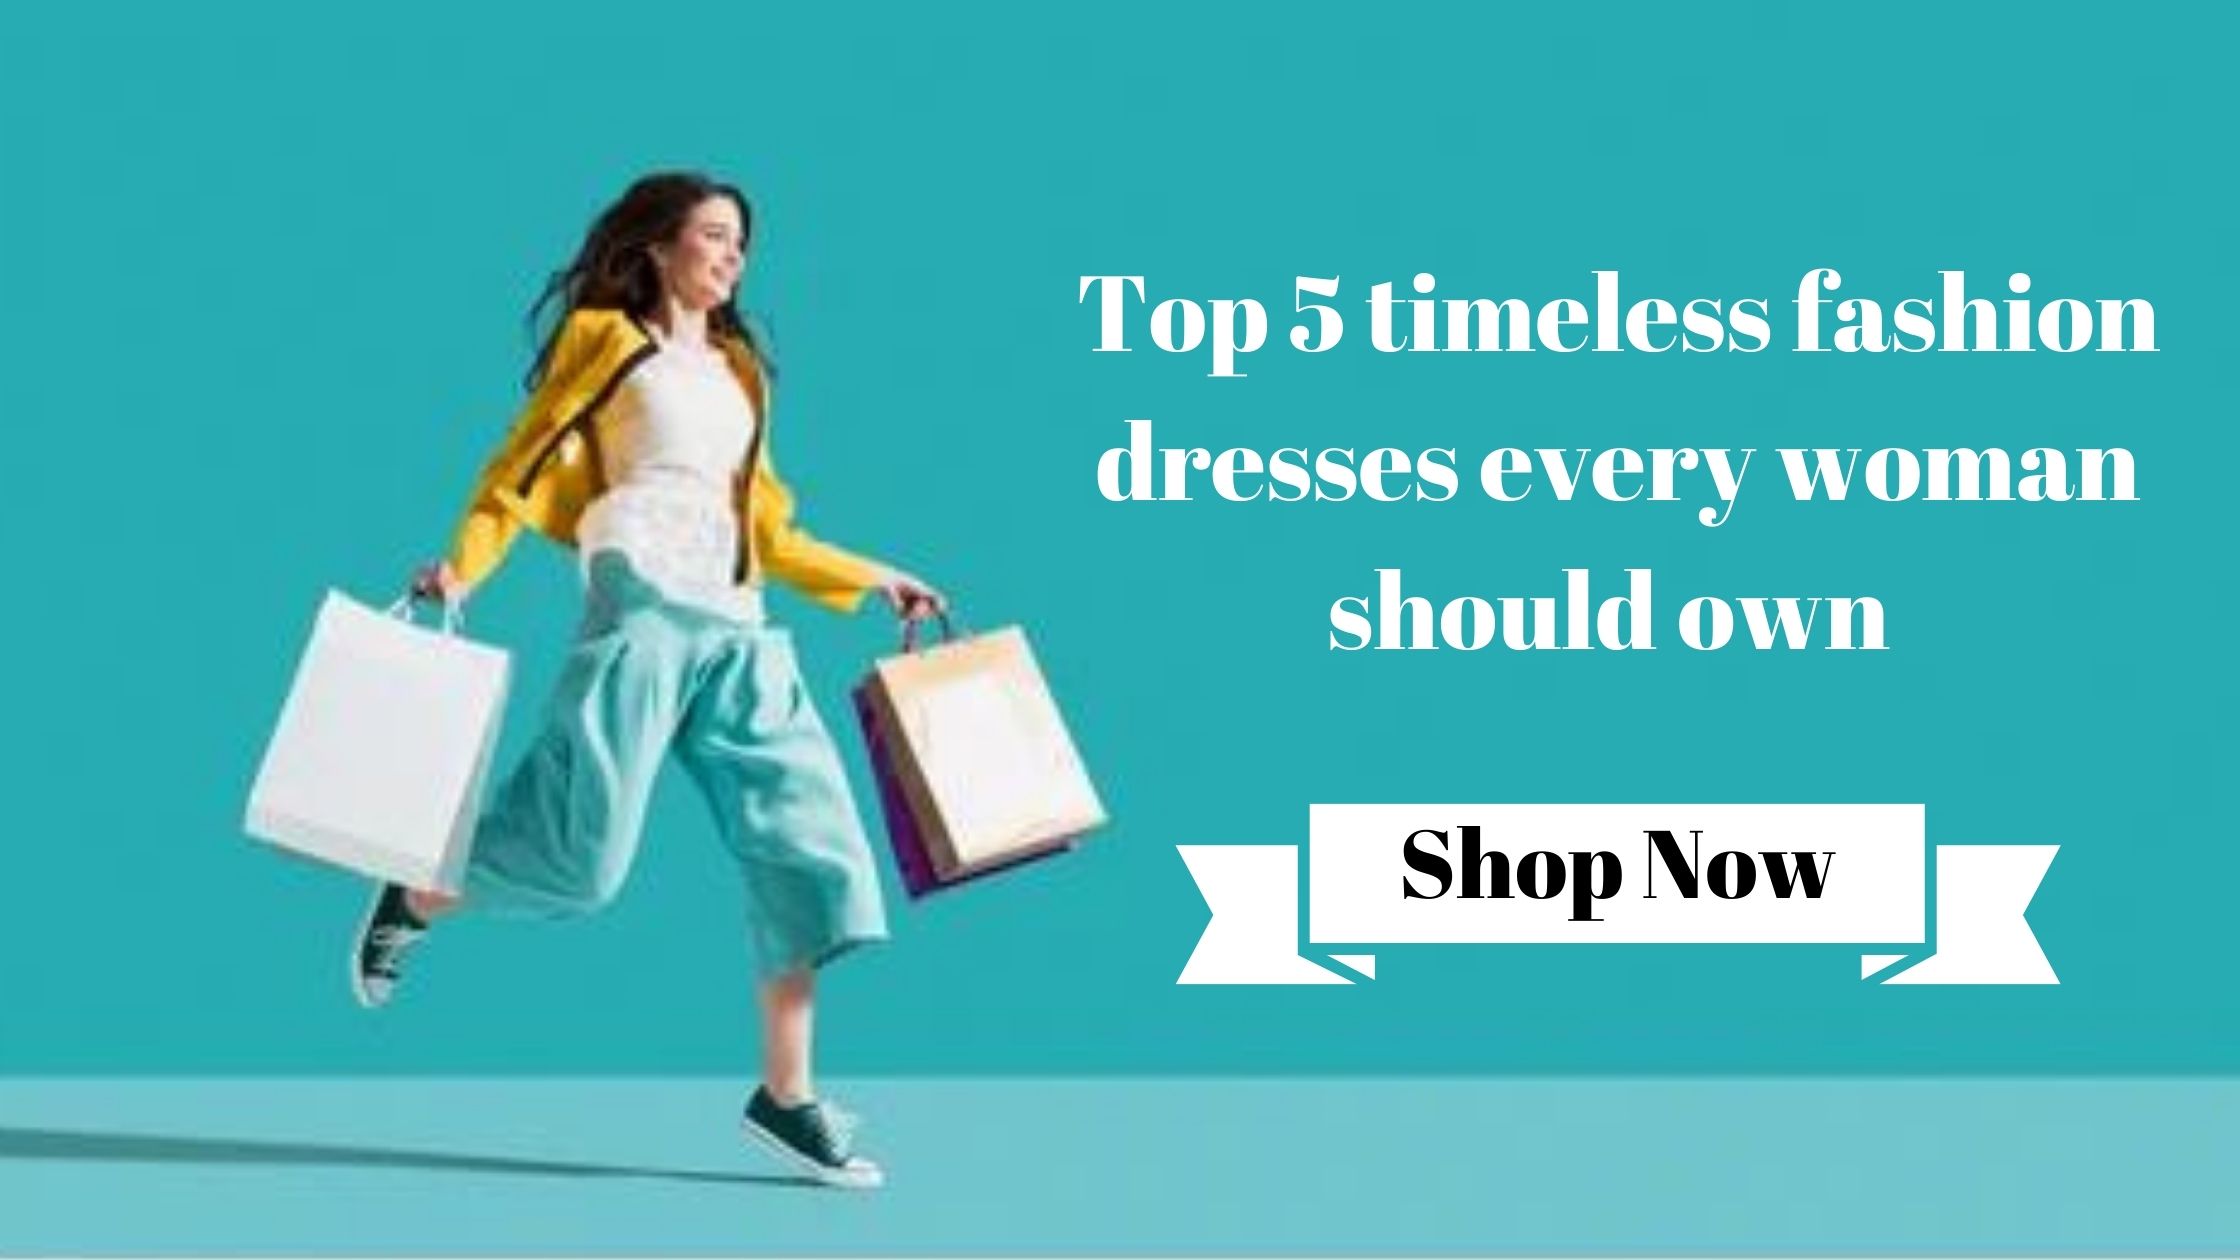 You are currently viewing Top 5 timeless fashion dresses every woman should own